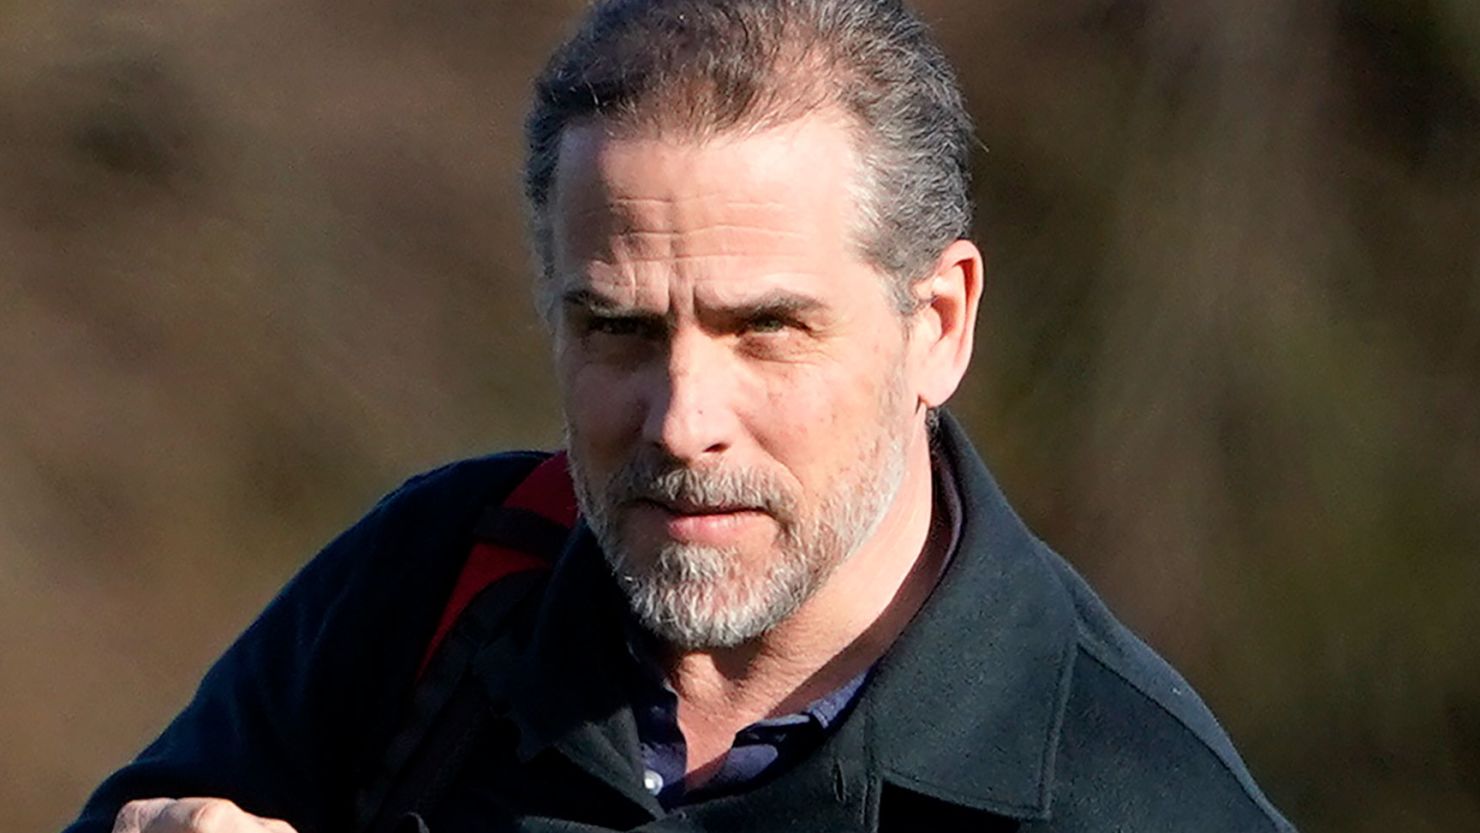 Hunter Biden, the son of President Joe Biden, is seen after stepping off Marine One behind his father President Joe Biden at Fort Lesley J. McNair, on April 17, 2022, in Washington.